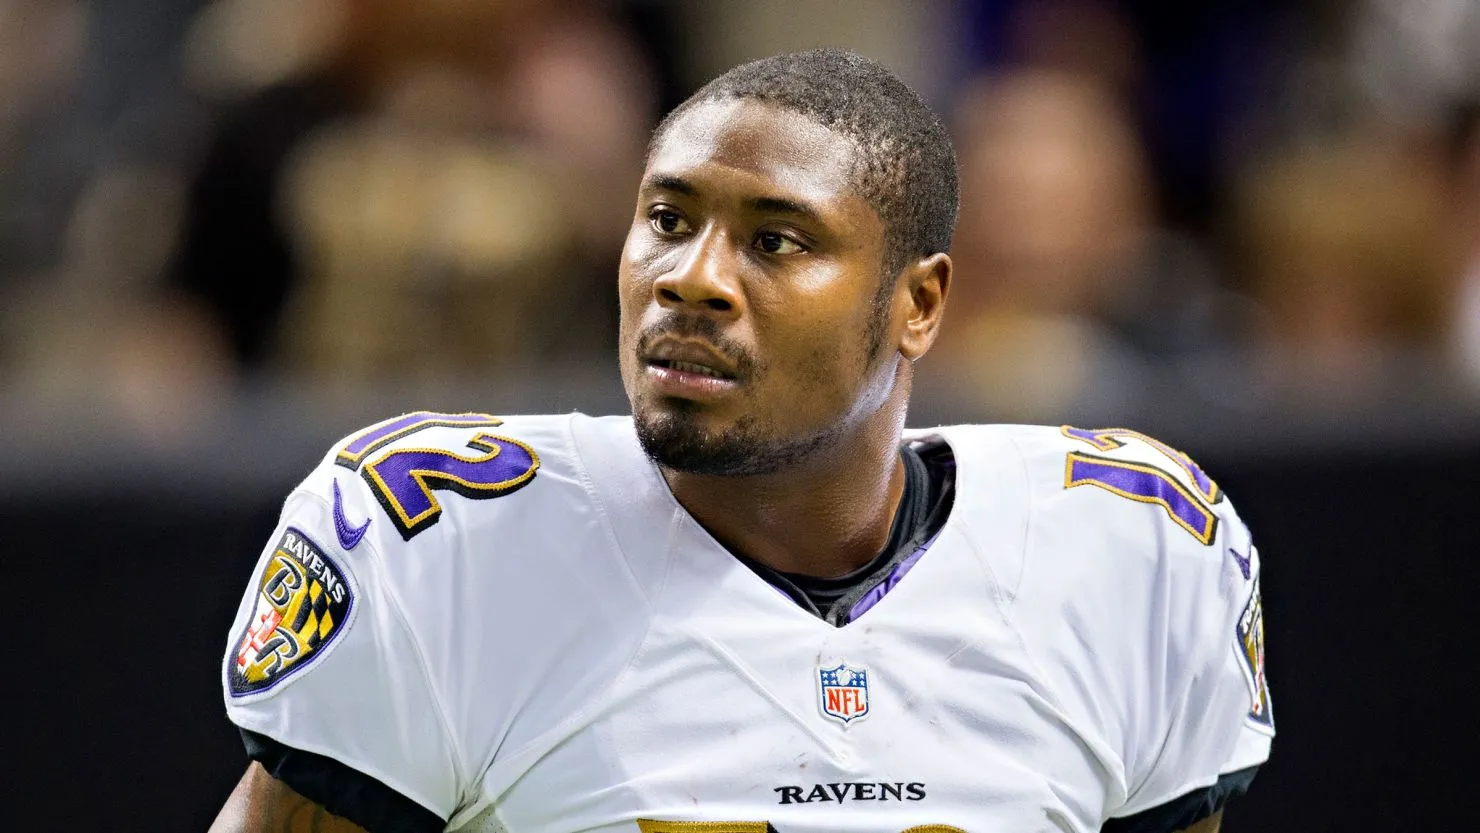 Former NFL Wide Receiver Jacoby Jones Dies at Age 40